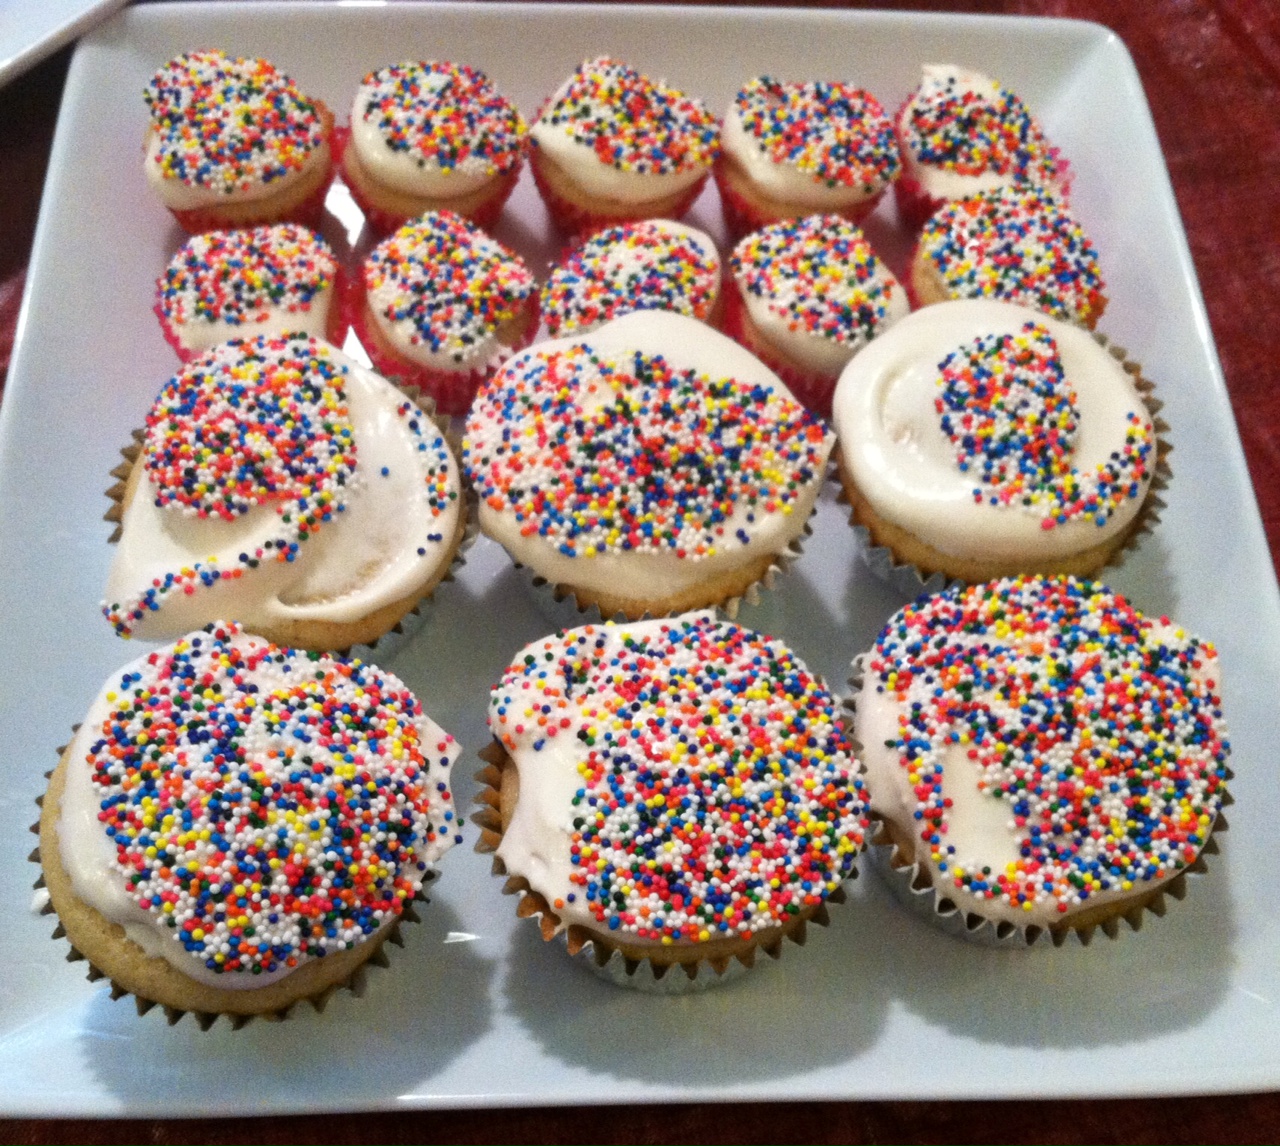 Vanilla Cupcakes with Whipped Frosting